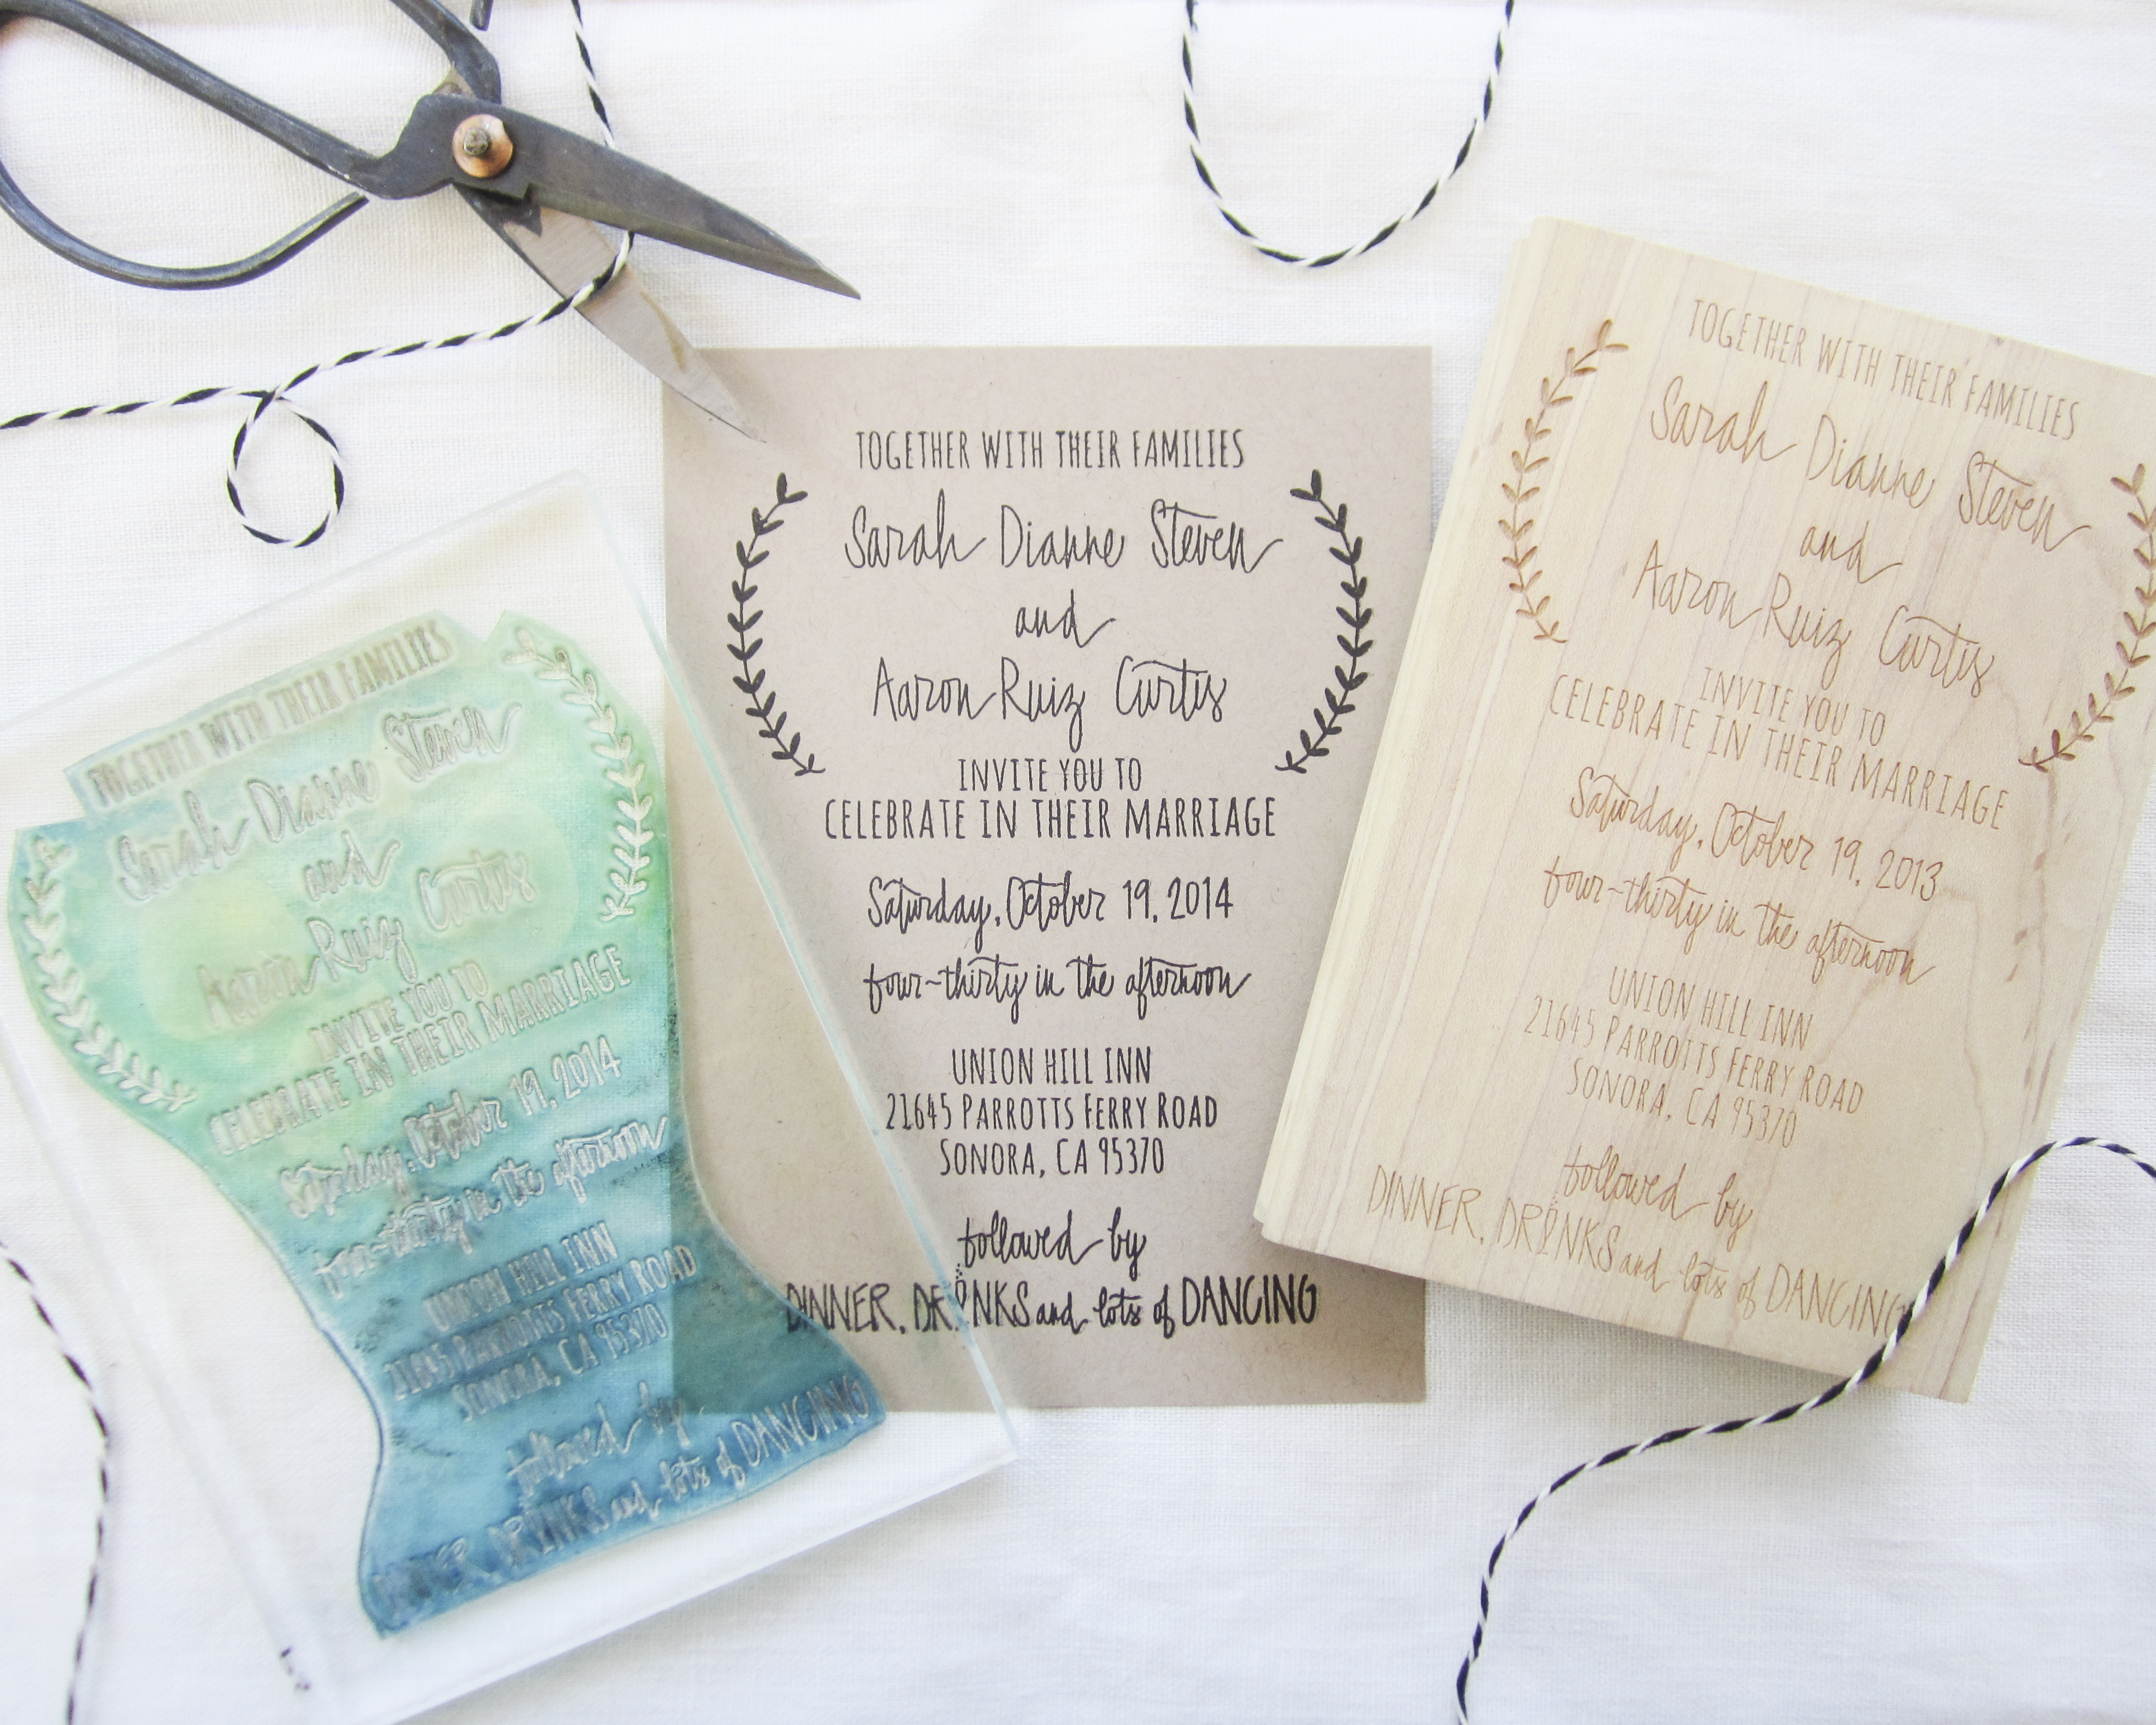 Rubber Stamps, Ink Stamps & Clear Stamps